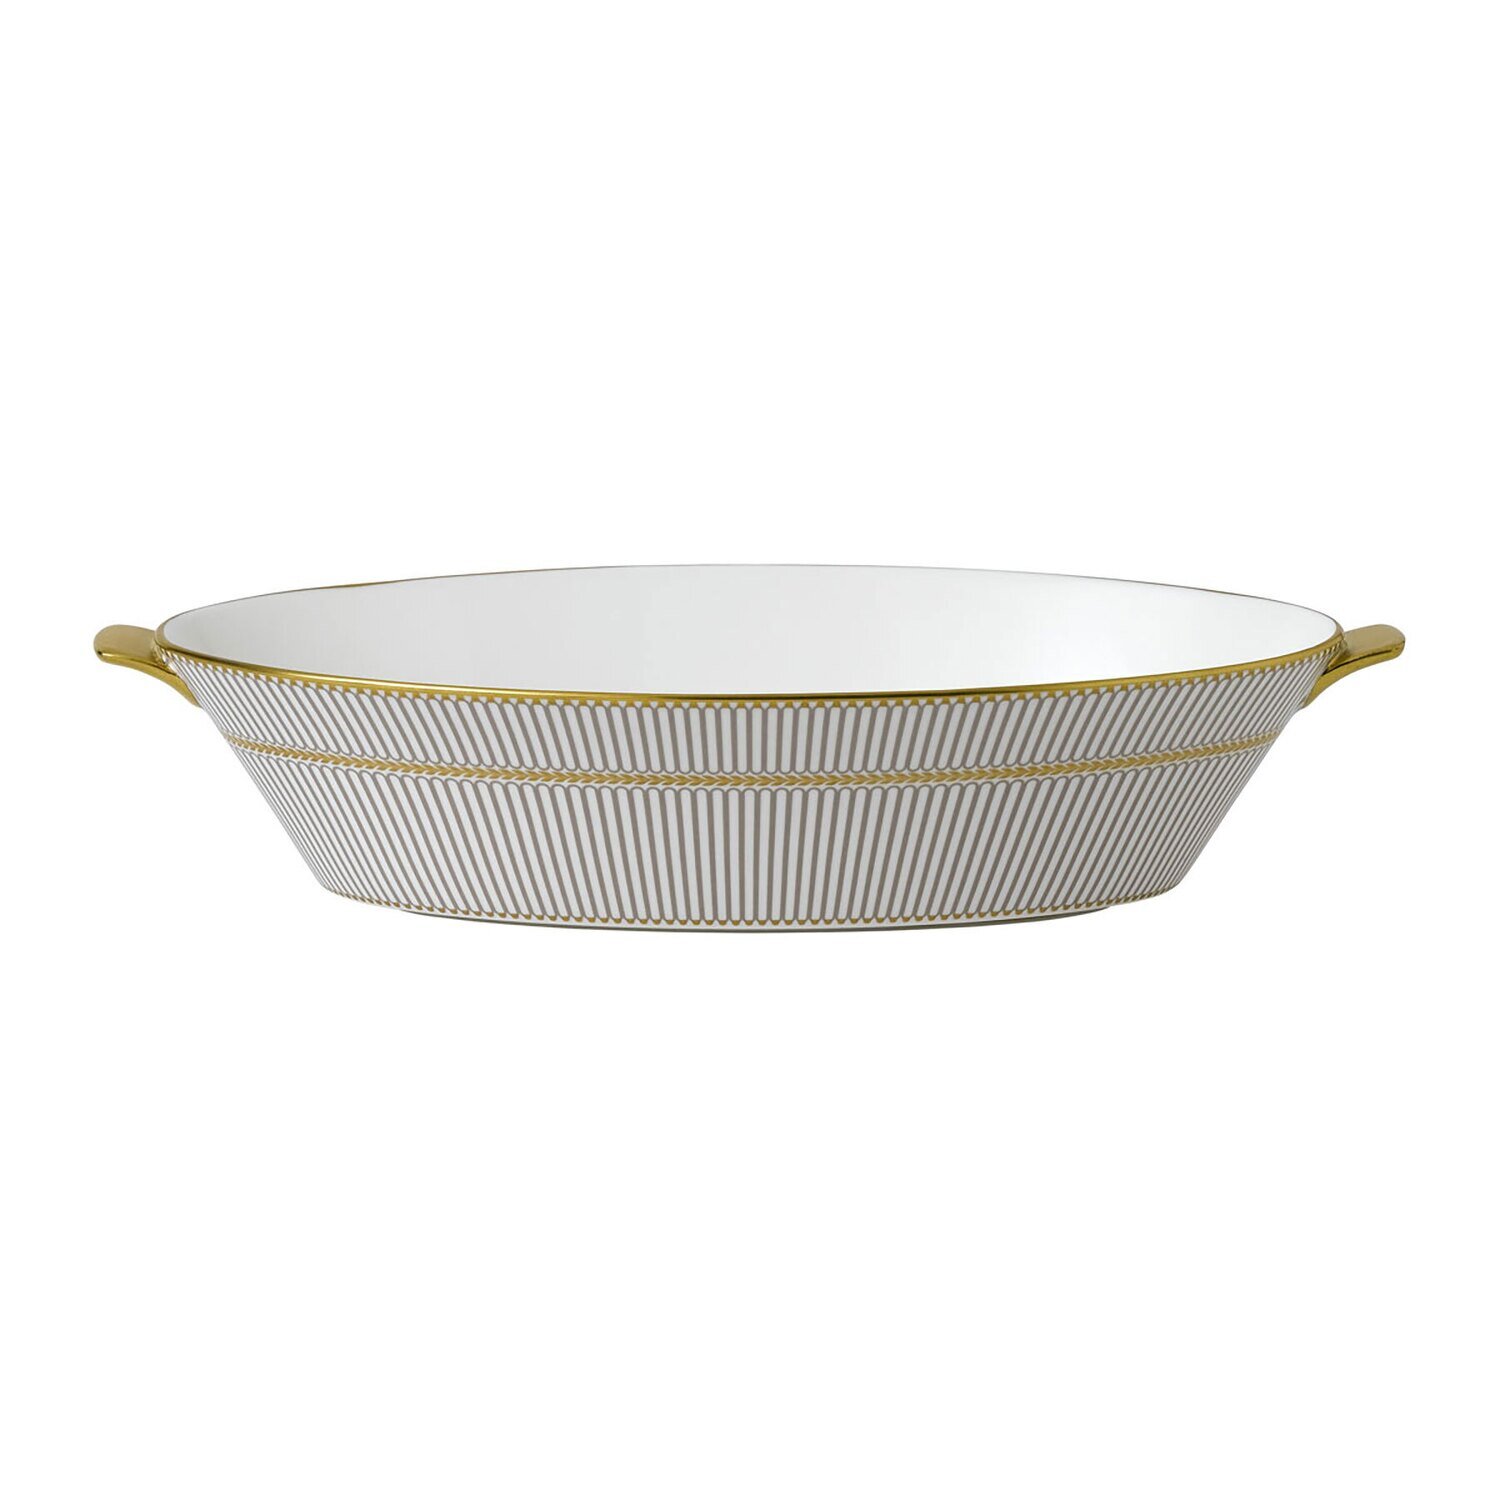 Wedgwood Anthemion Grey Oval Serving Bowl 1.3 L 1054391